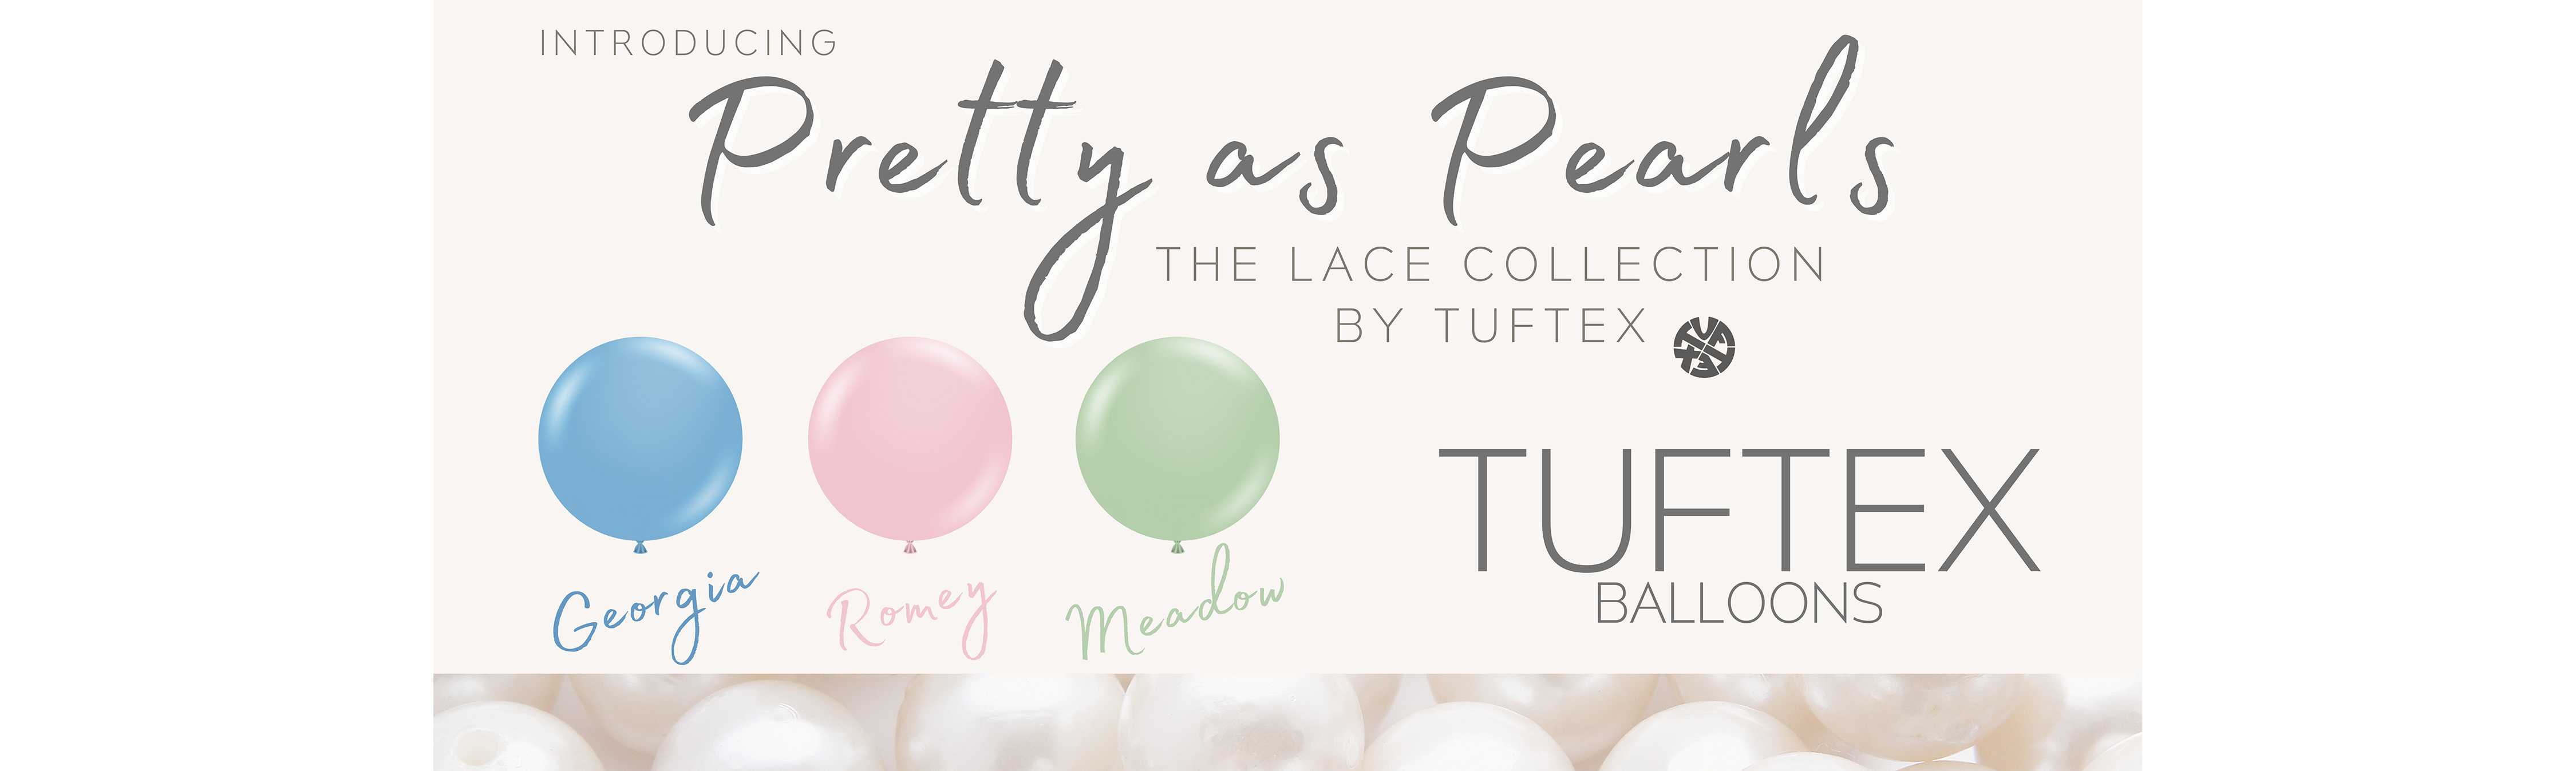 TUFTEX Lace Collection Latex Balloons